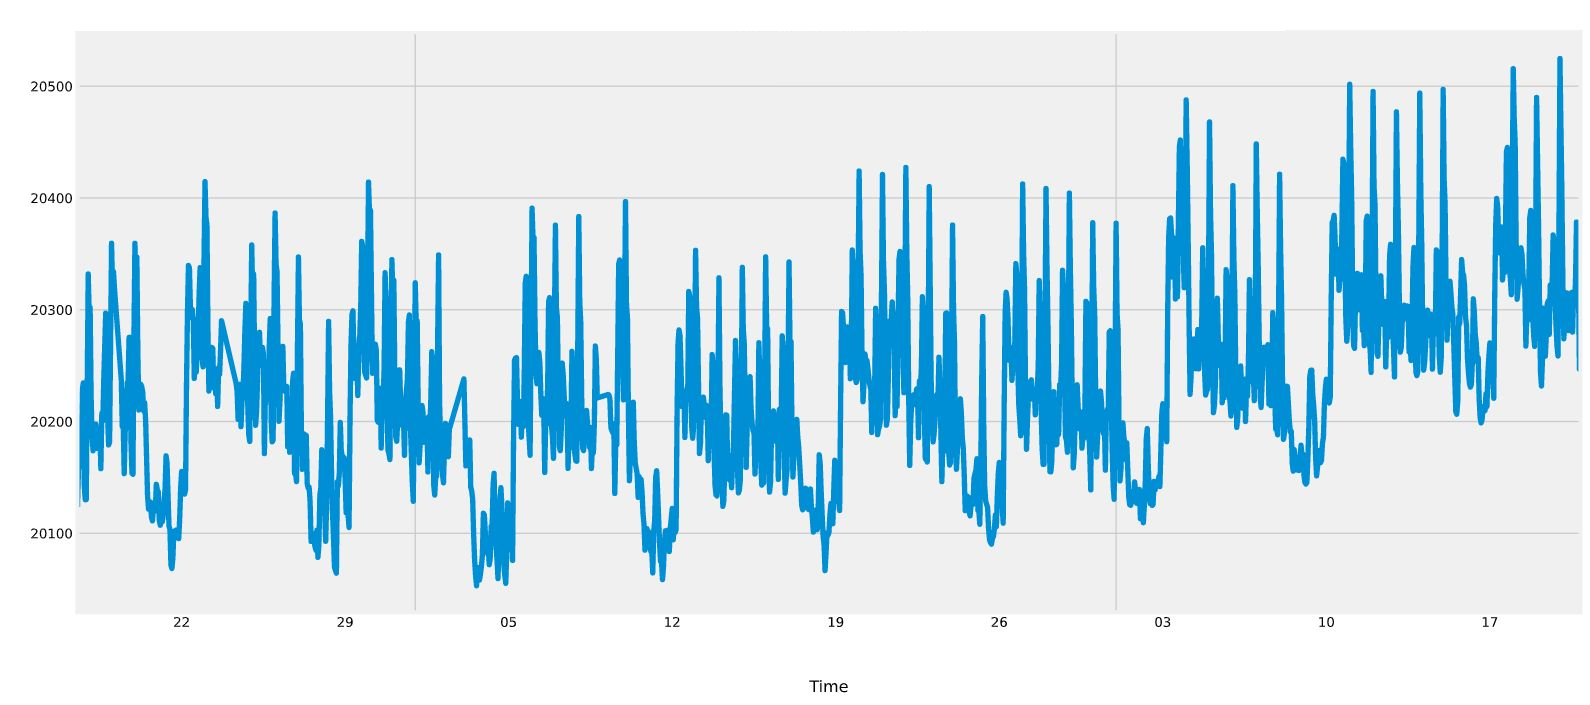 Time series with a weekly seasonality